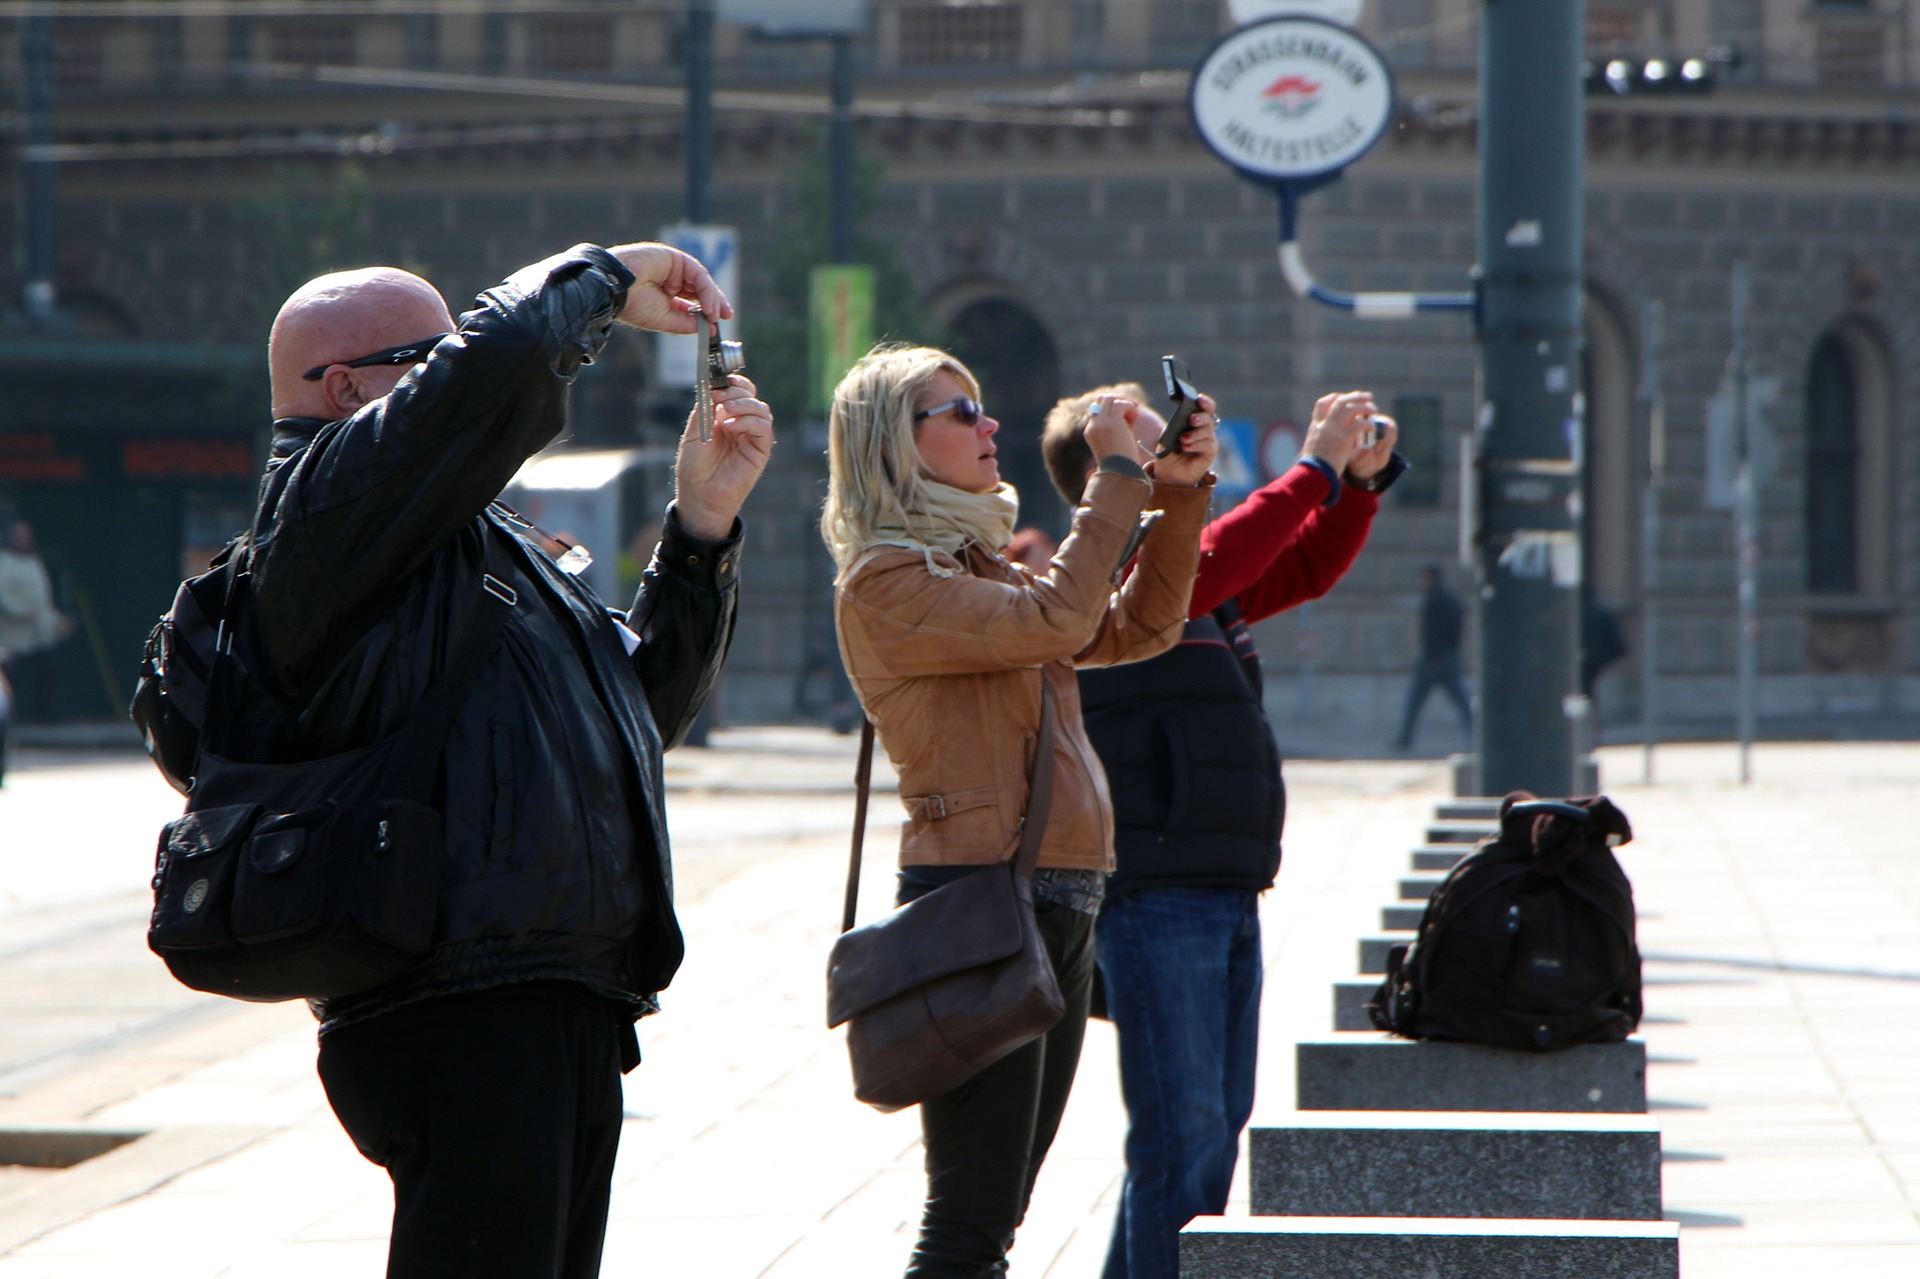 Tourists taking pictures